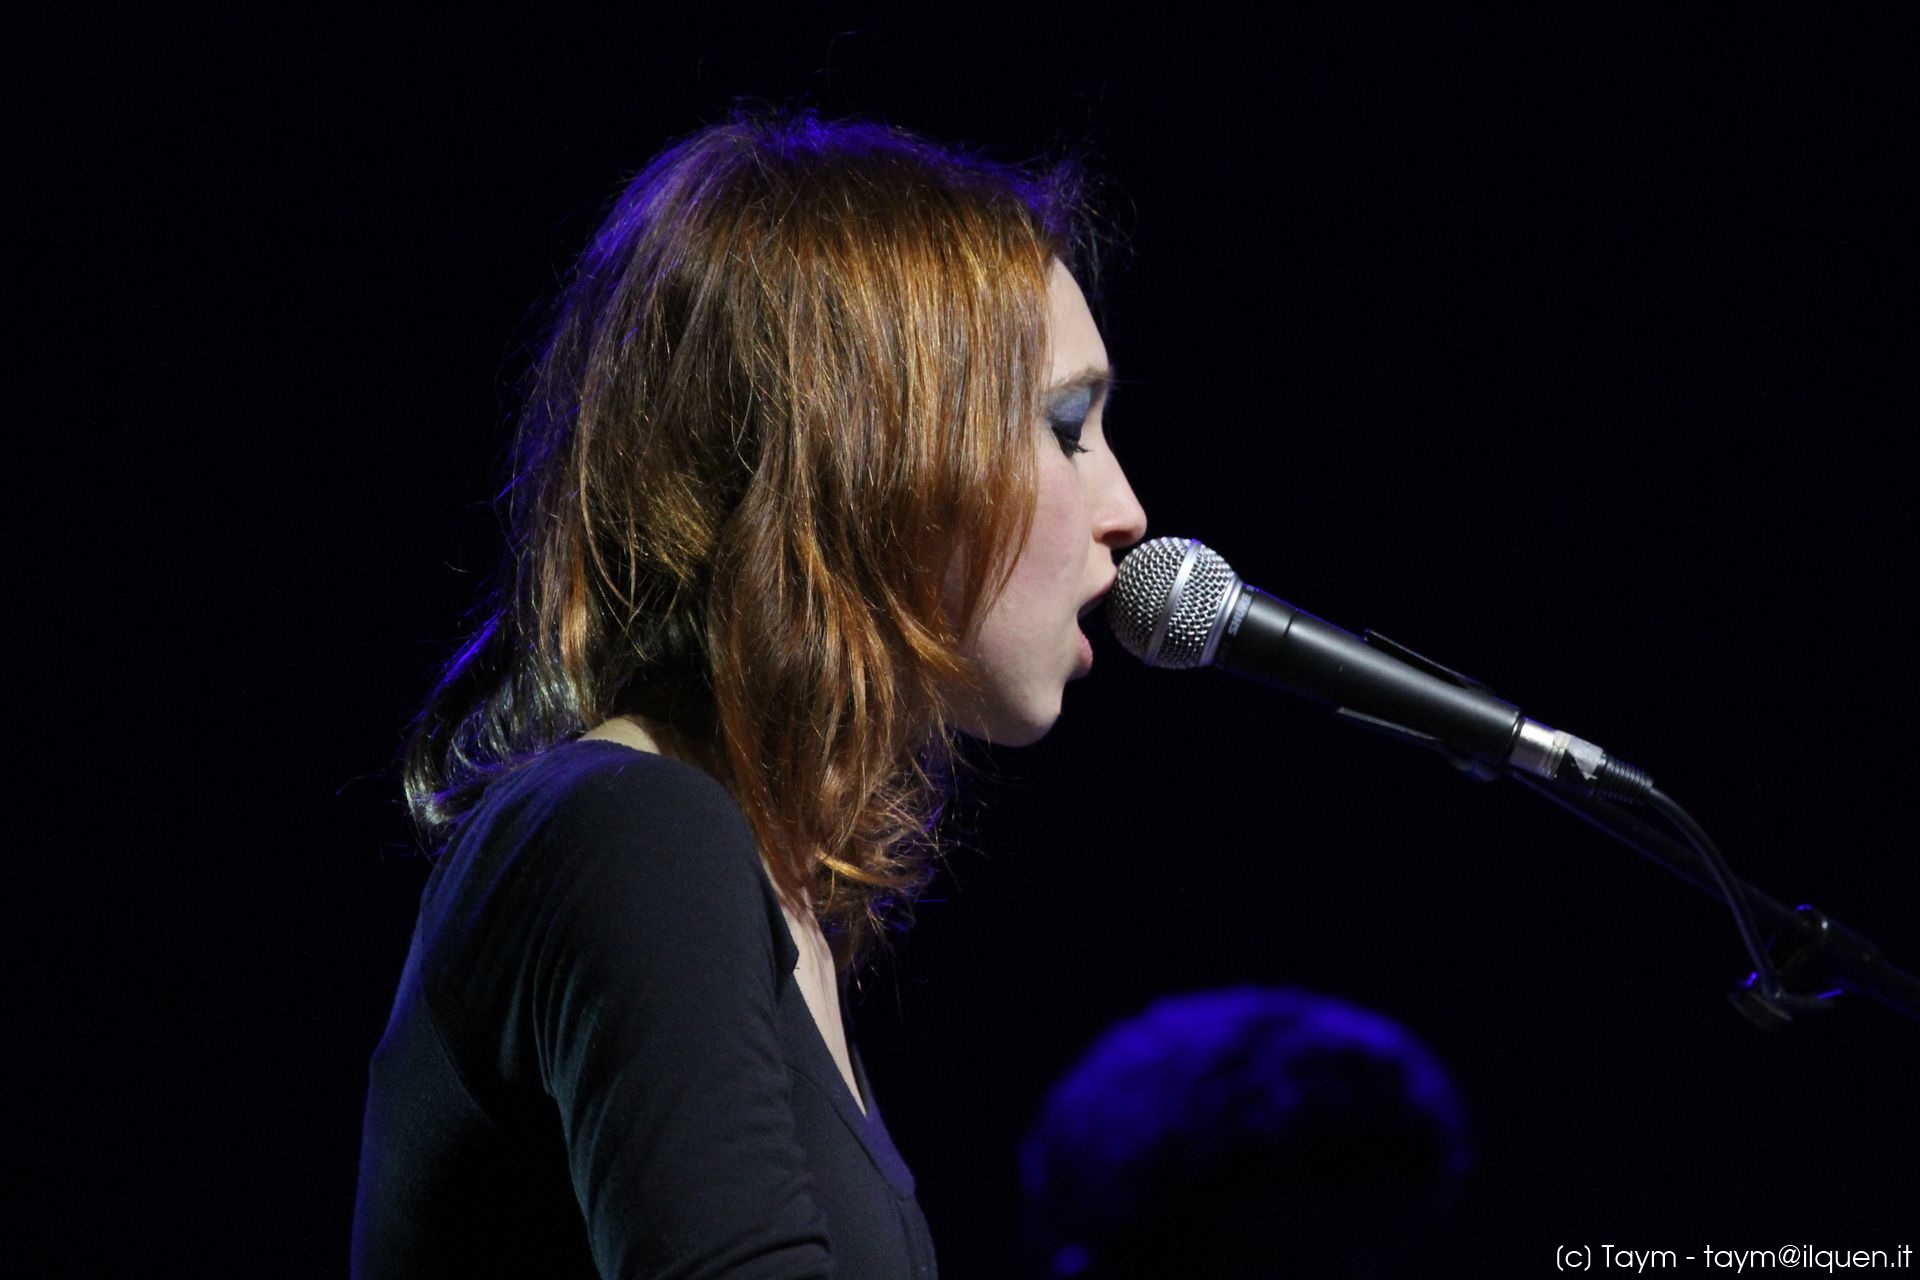 the woman is singing into her microphone on stage